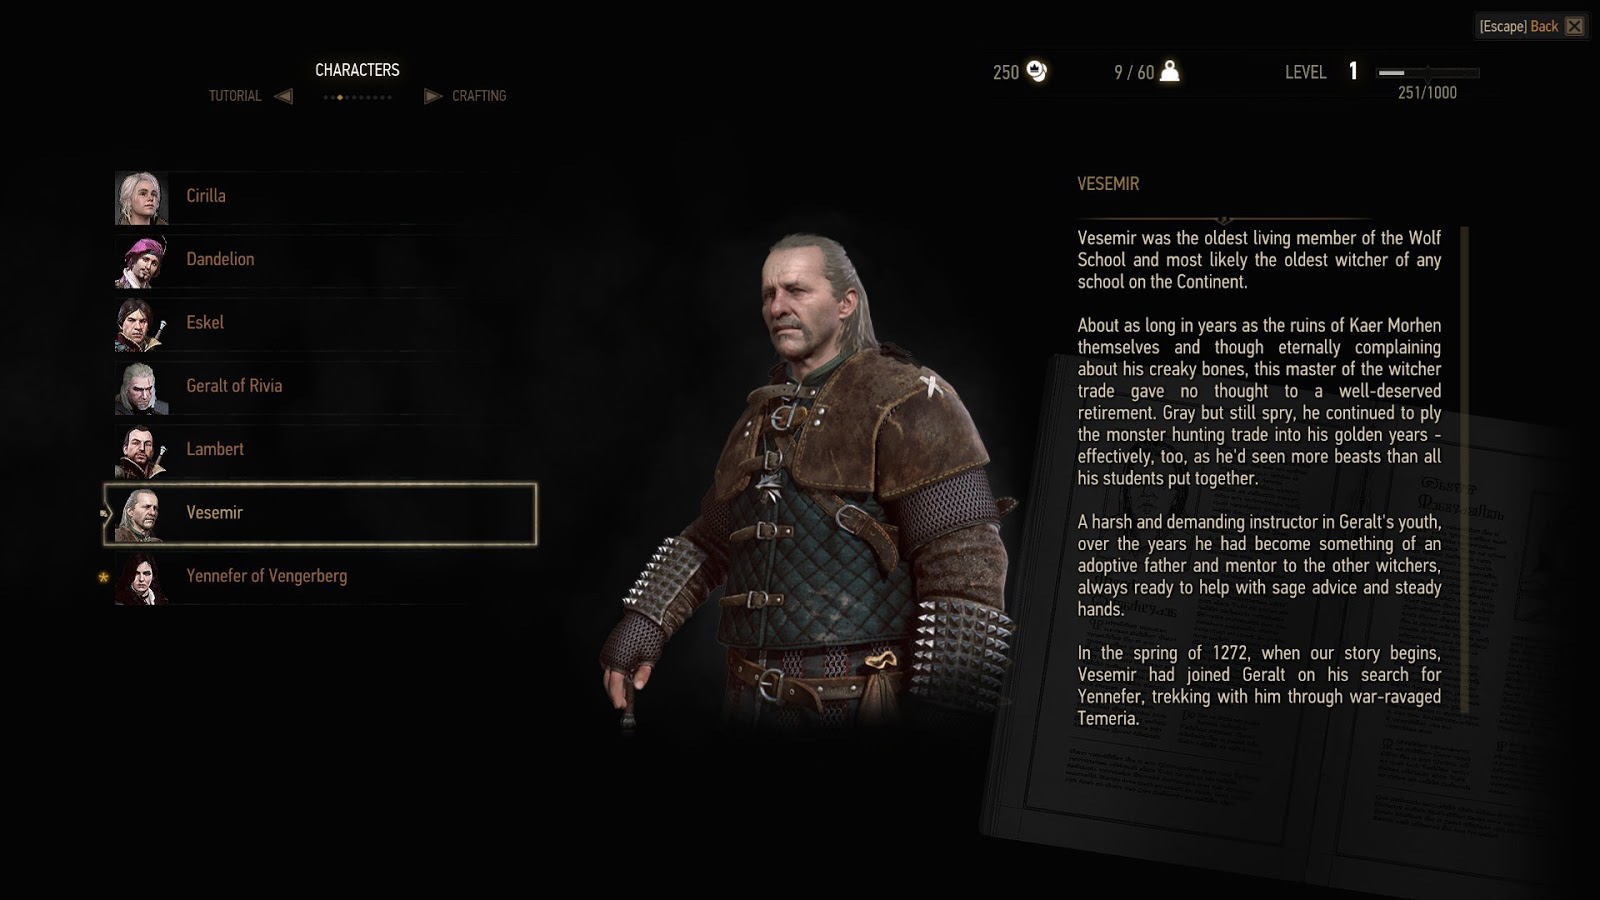 This Survival Mod For 'The Witcher 3: Wild Hunt' Seriously Ramps